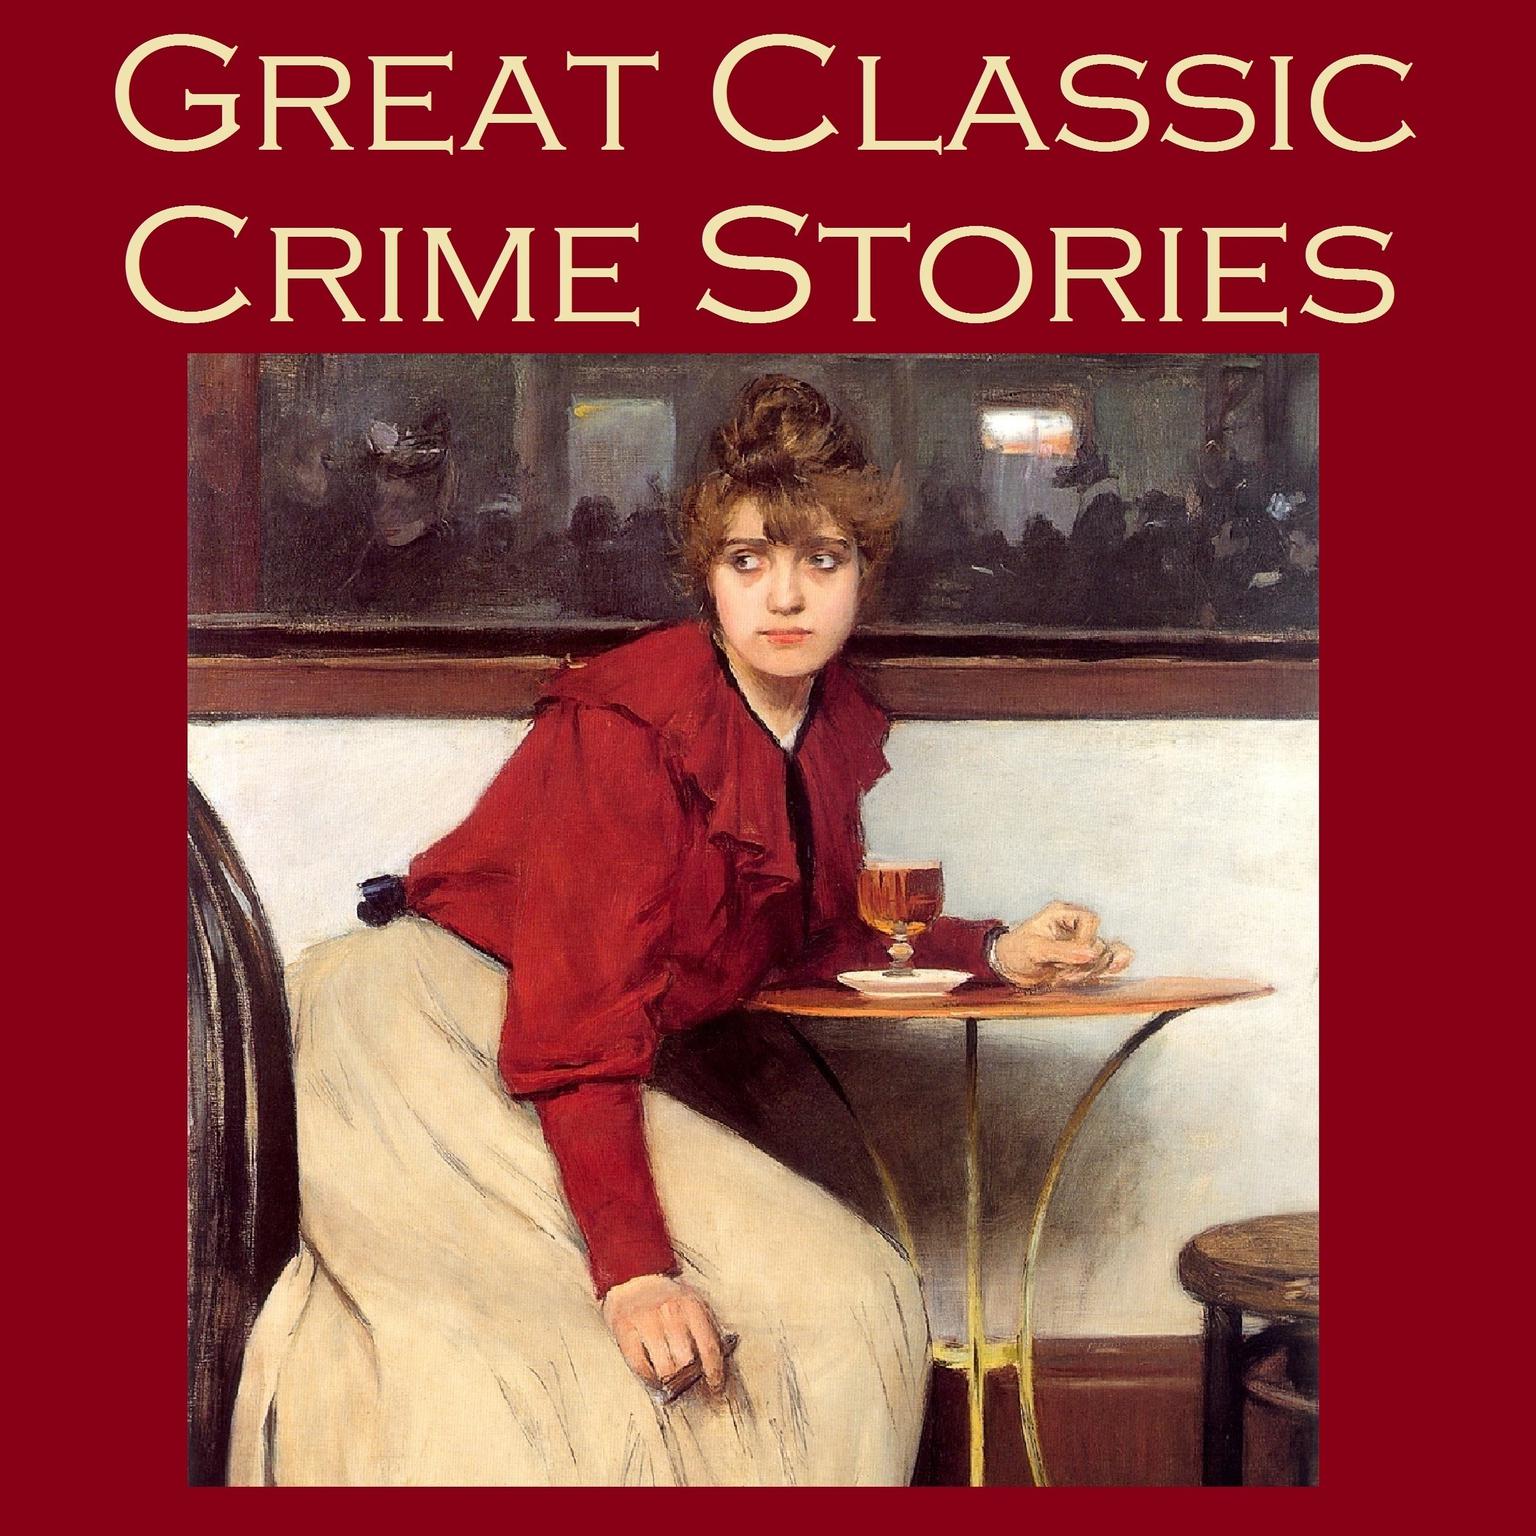 Great Classic Crime Stories: Tales of Murder, Robbery, Extortion, Blackmail, Forgery, and Worse Audiobook, by various authors